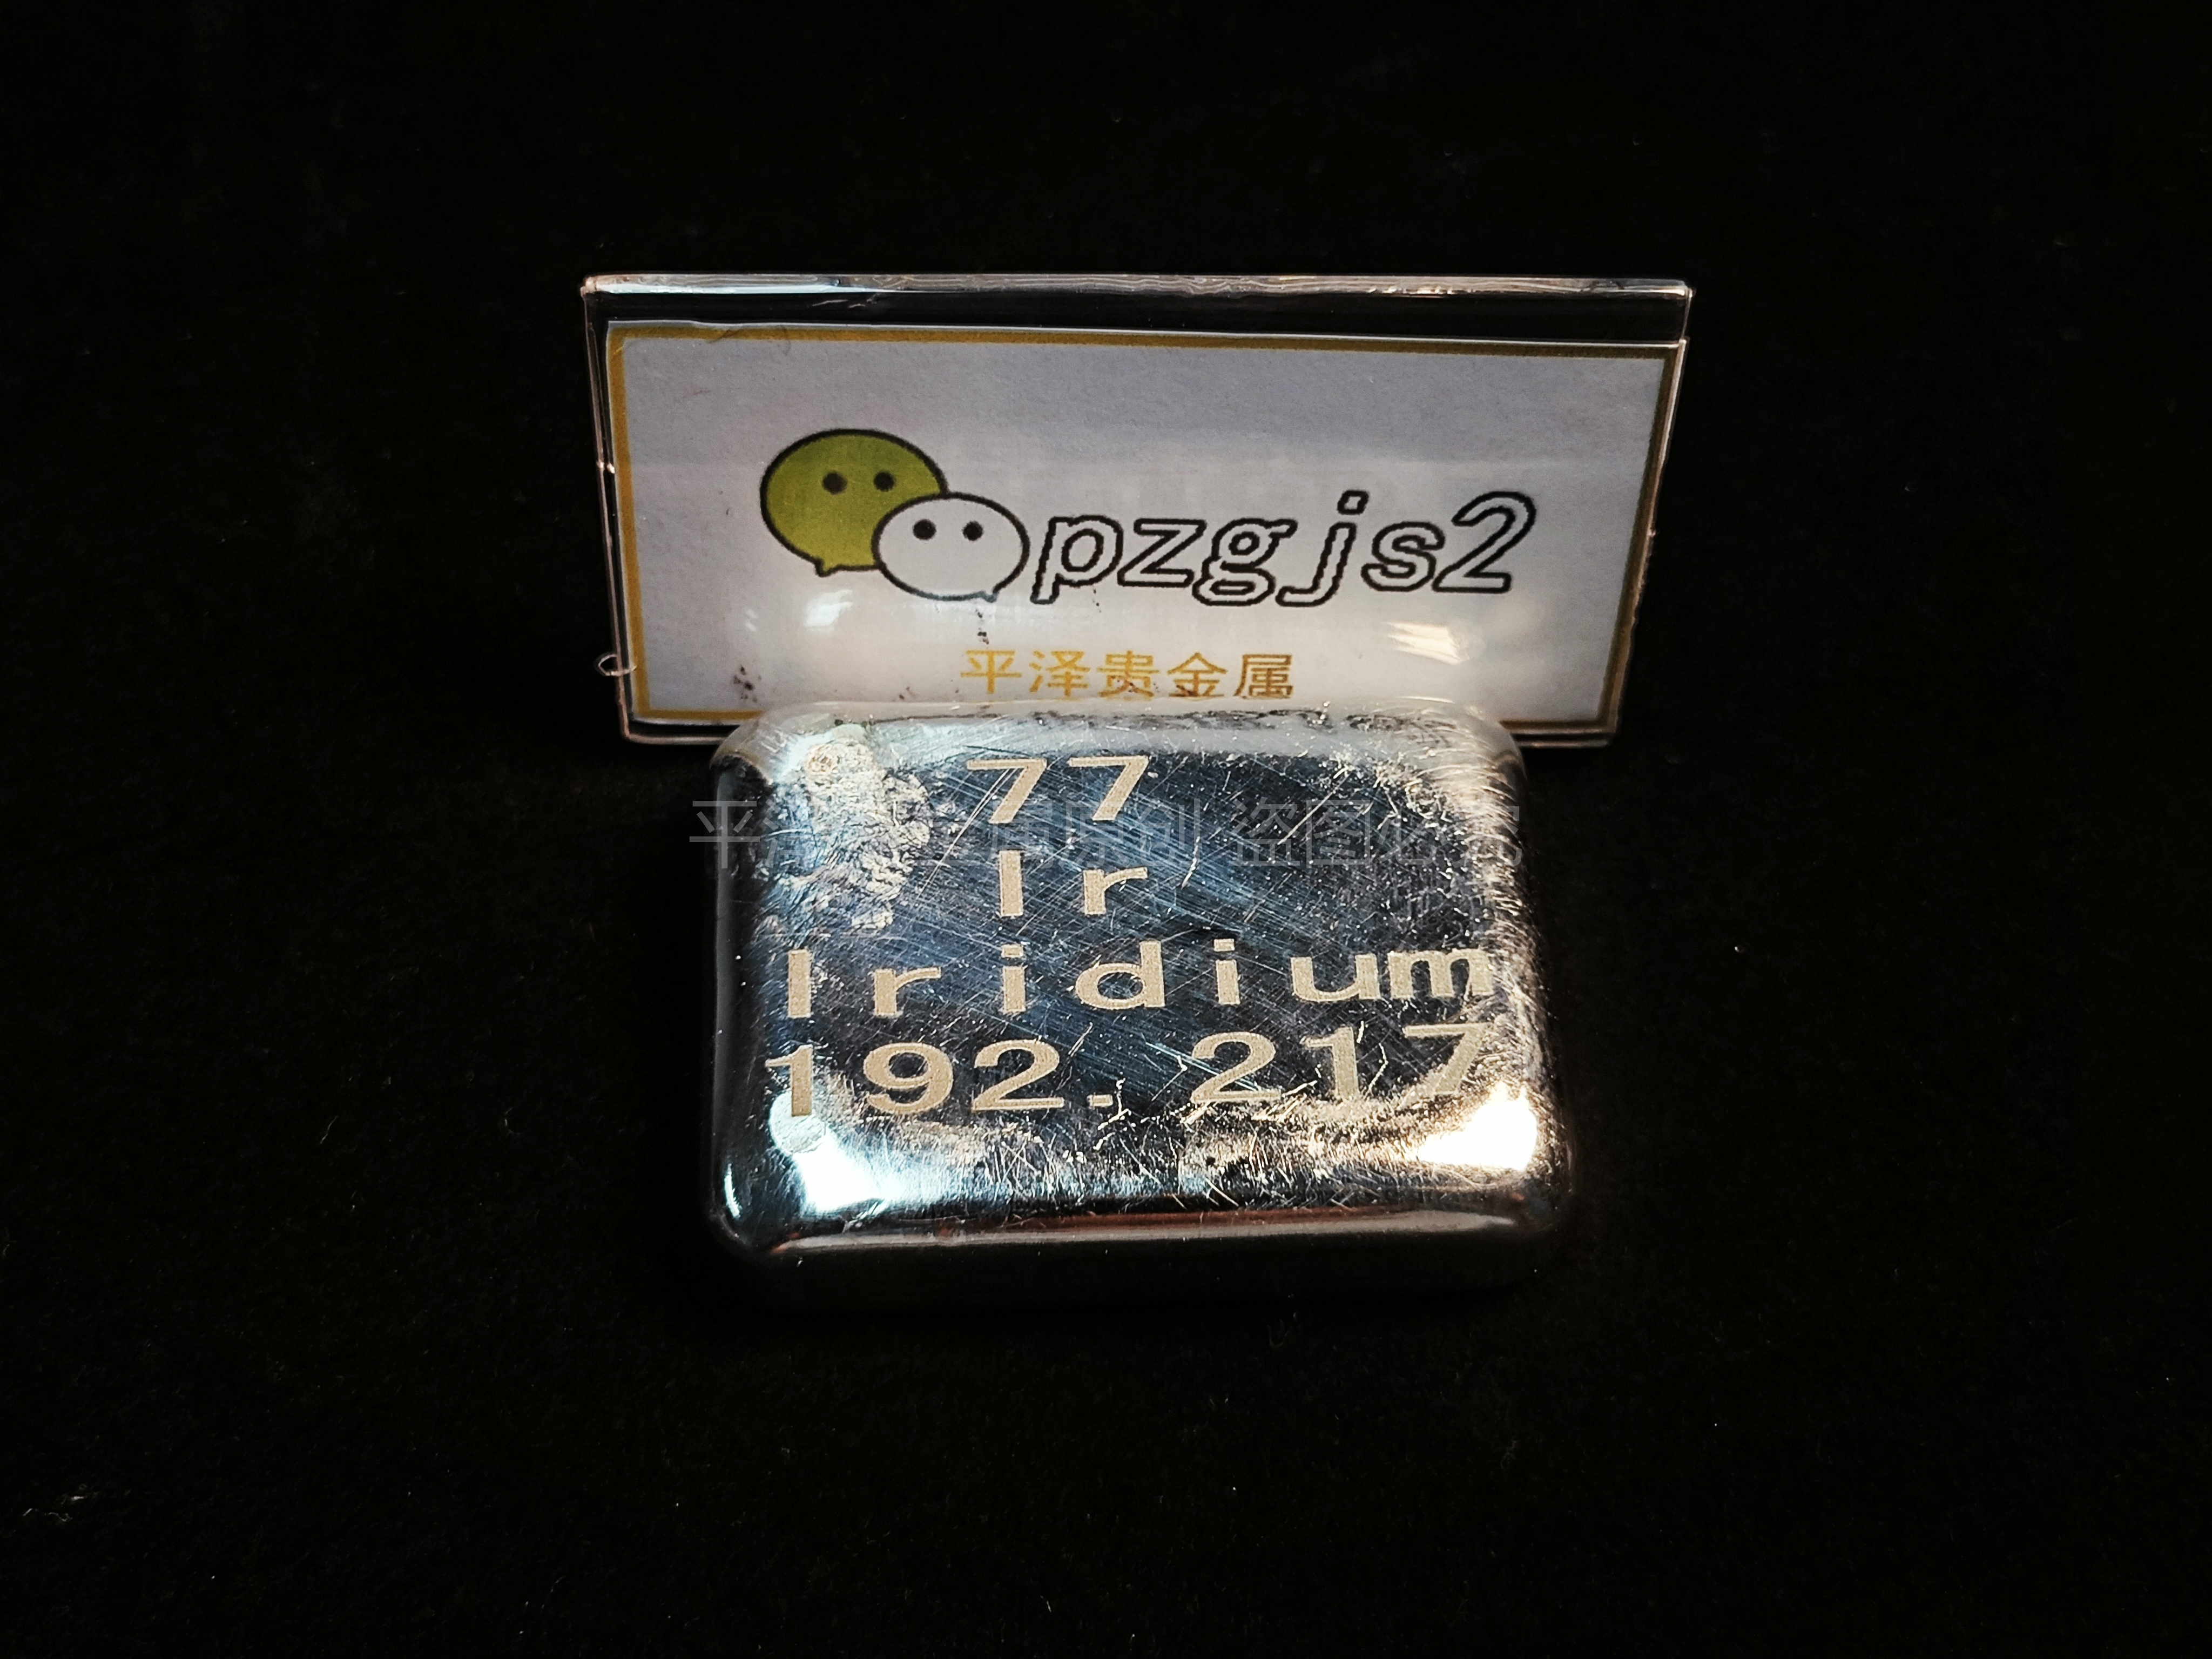 How to buy iridium and what is the value of iridium per ounce.